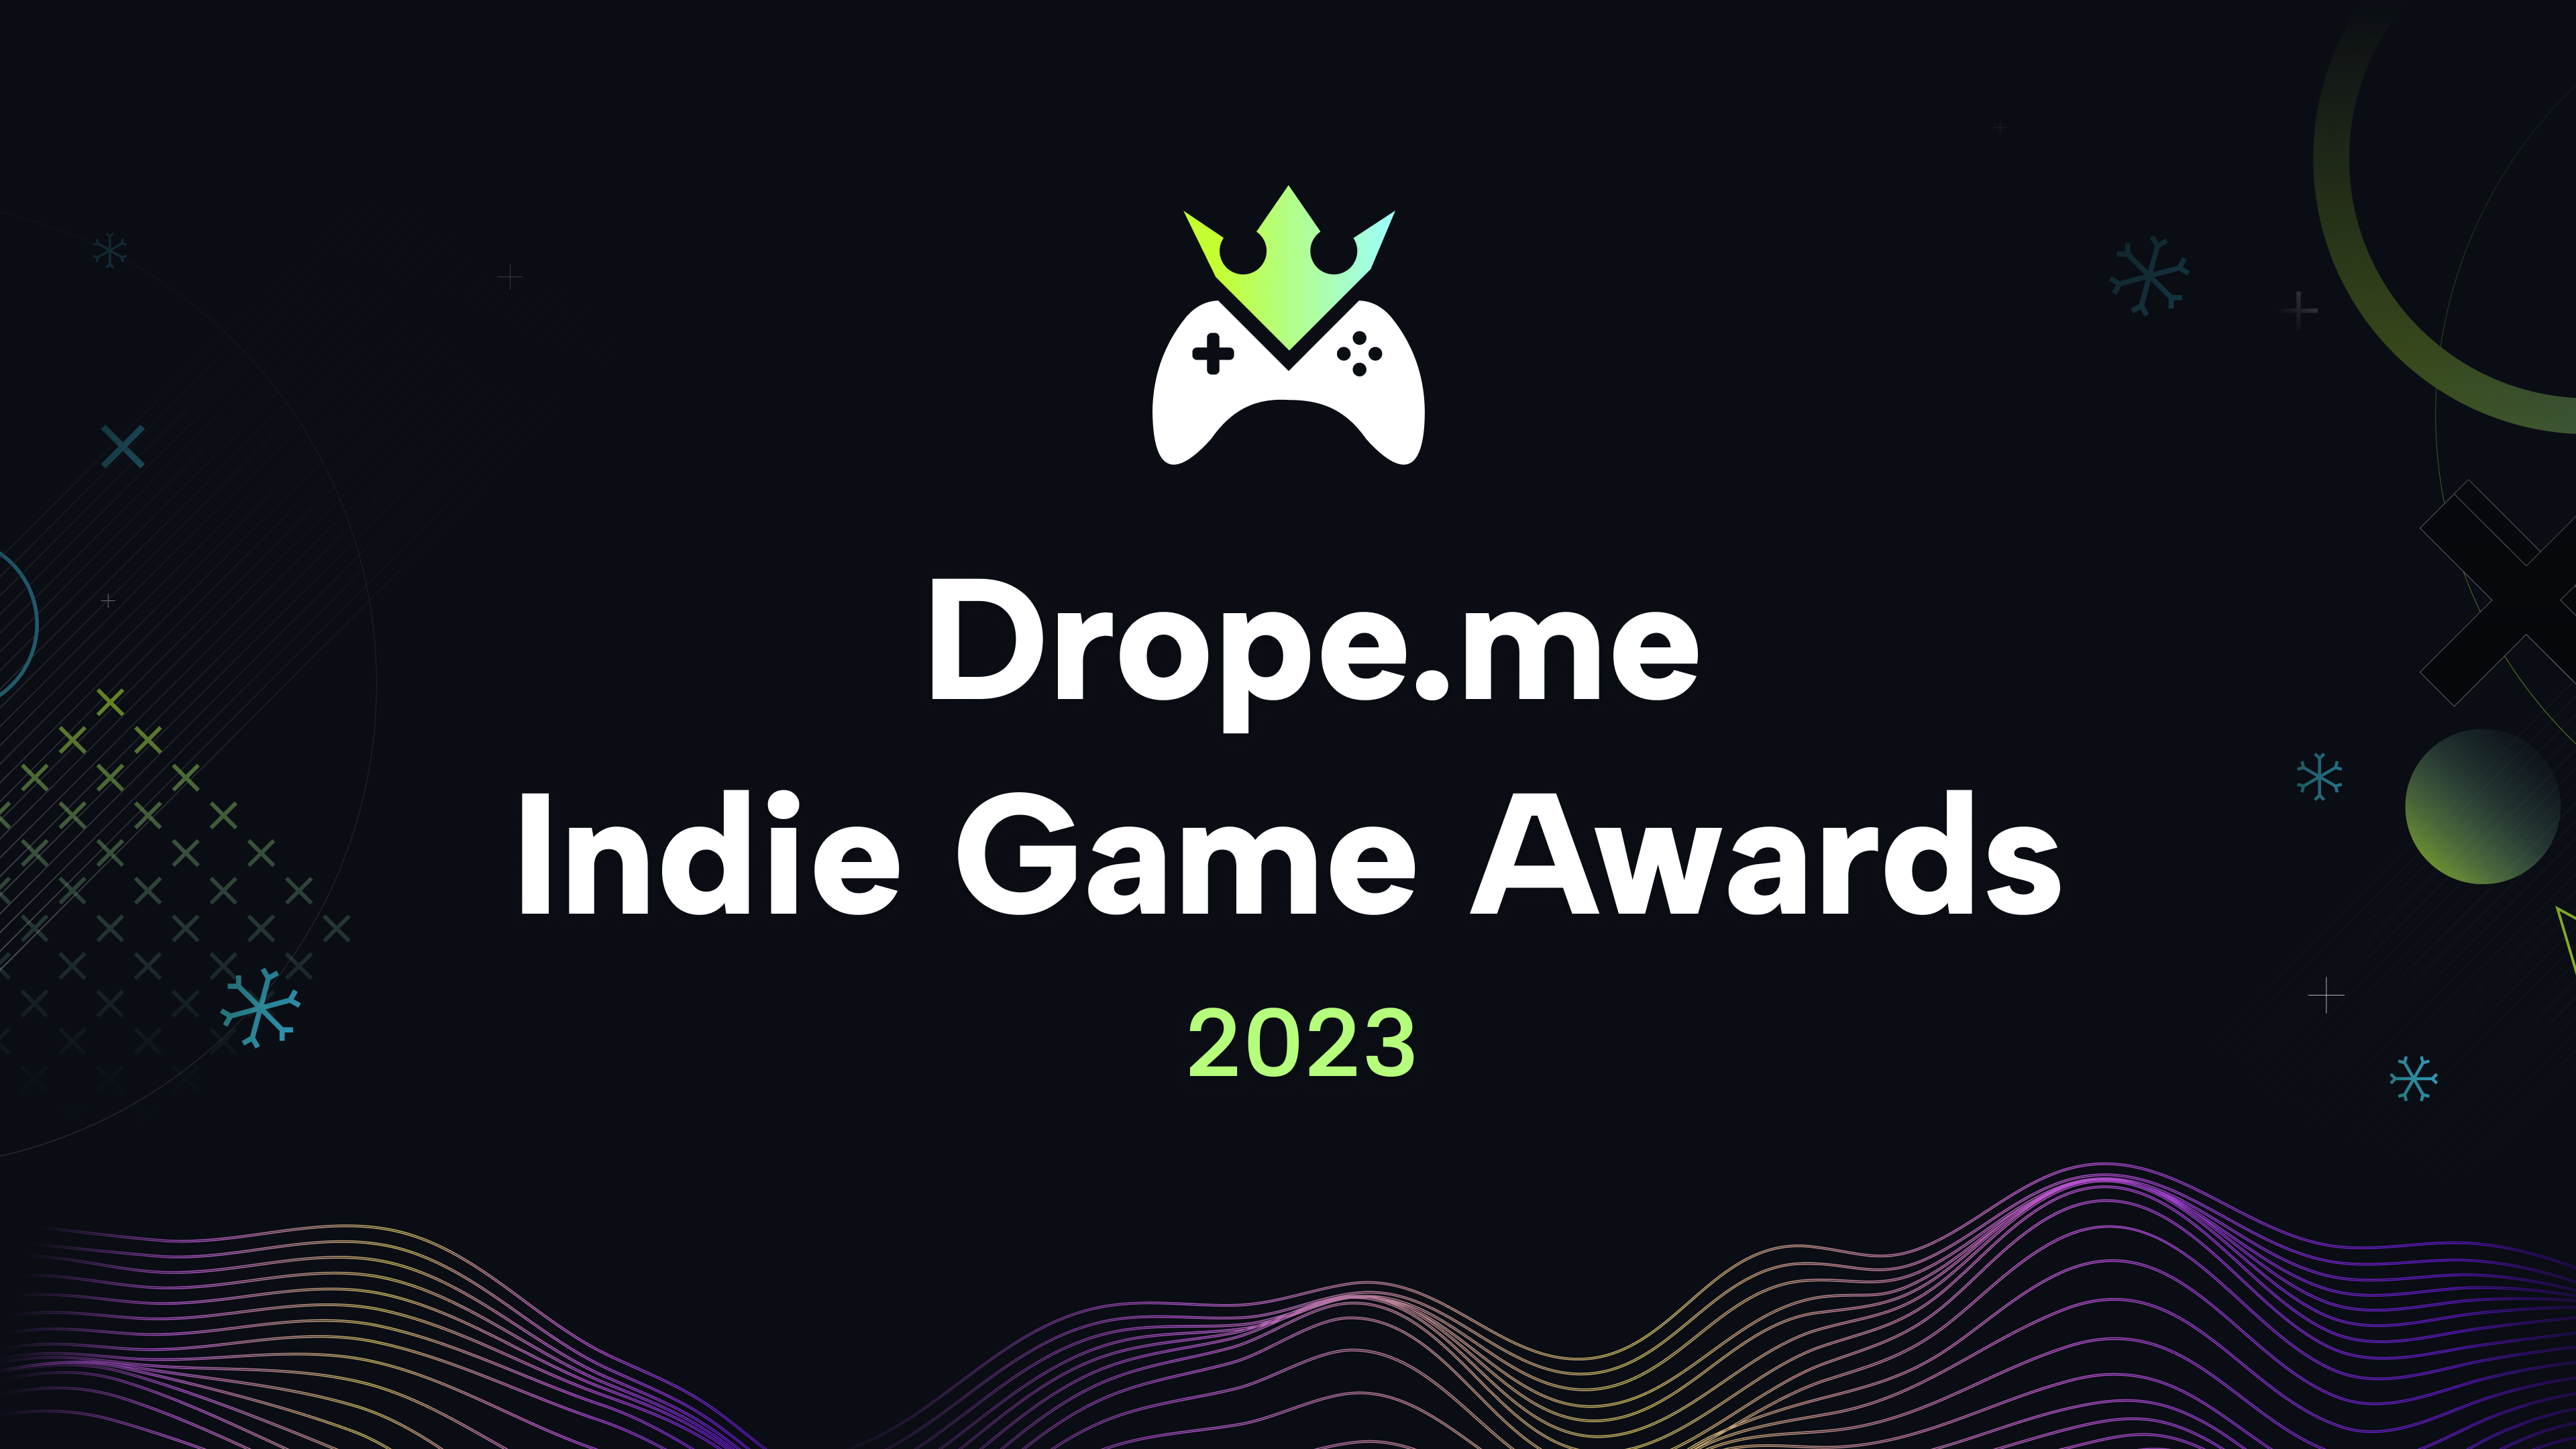 Drope.me Indie Game Awards 2023: Showcase Your Indie Game to the World